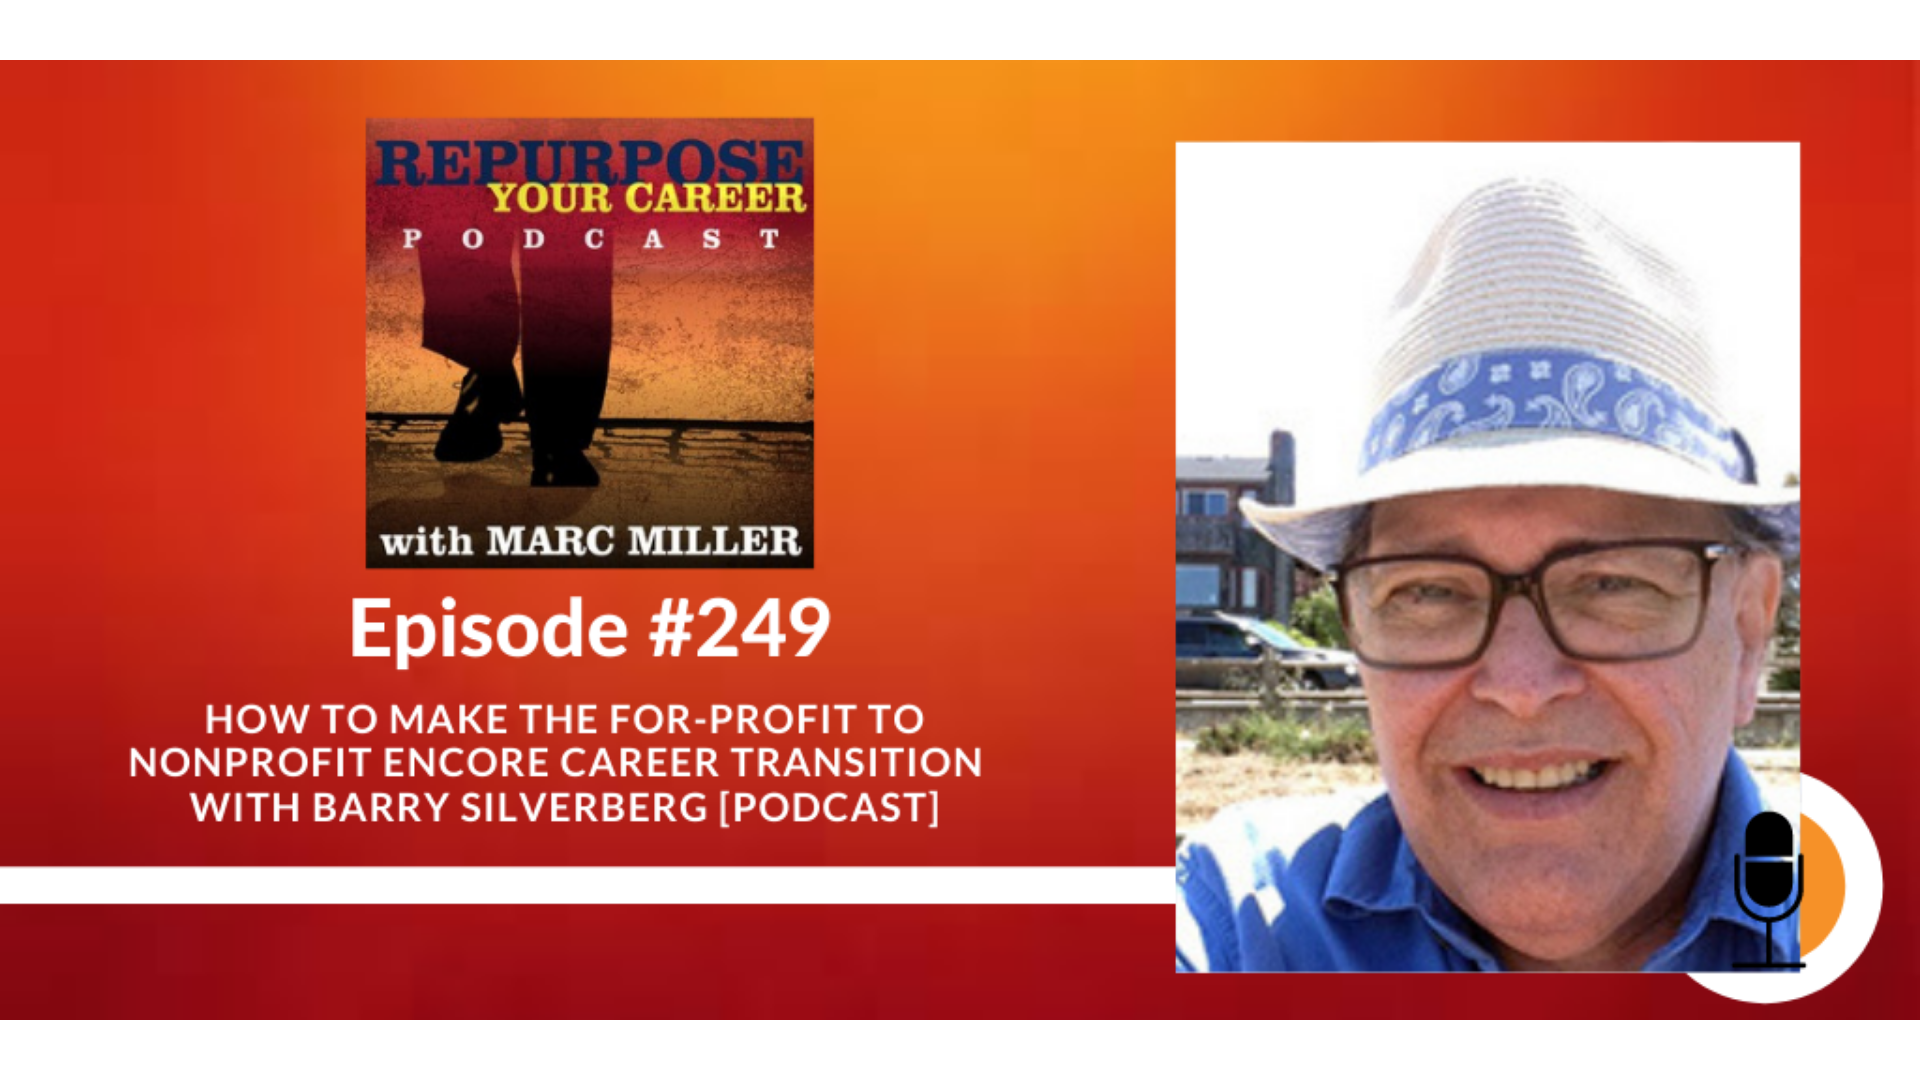 How to Make the For-Profit to NonProfit Encore Career Transition [Podcast]